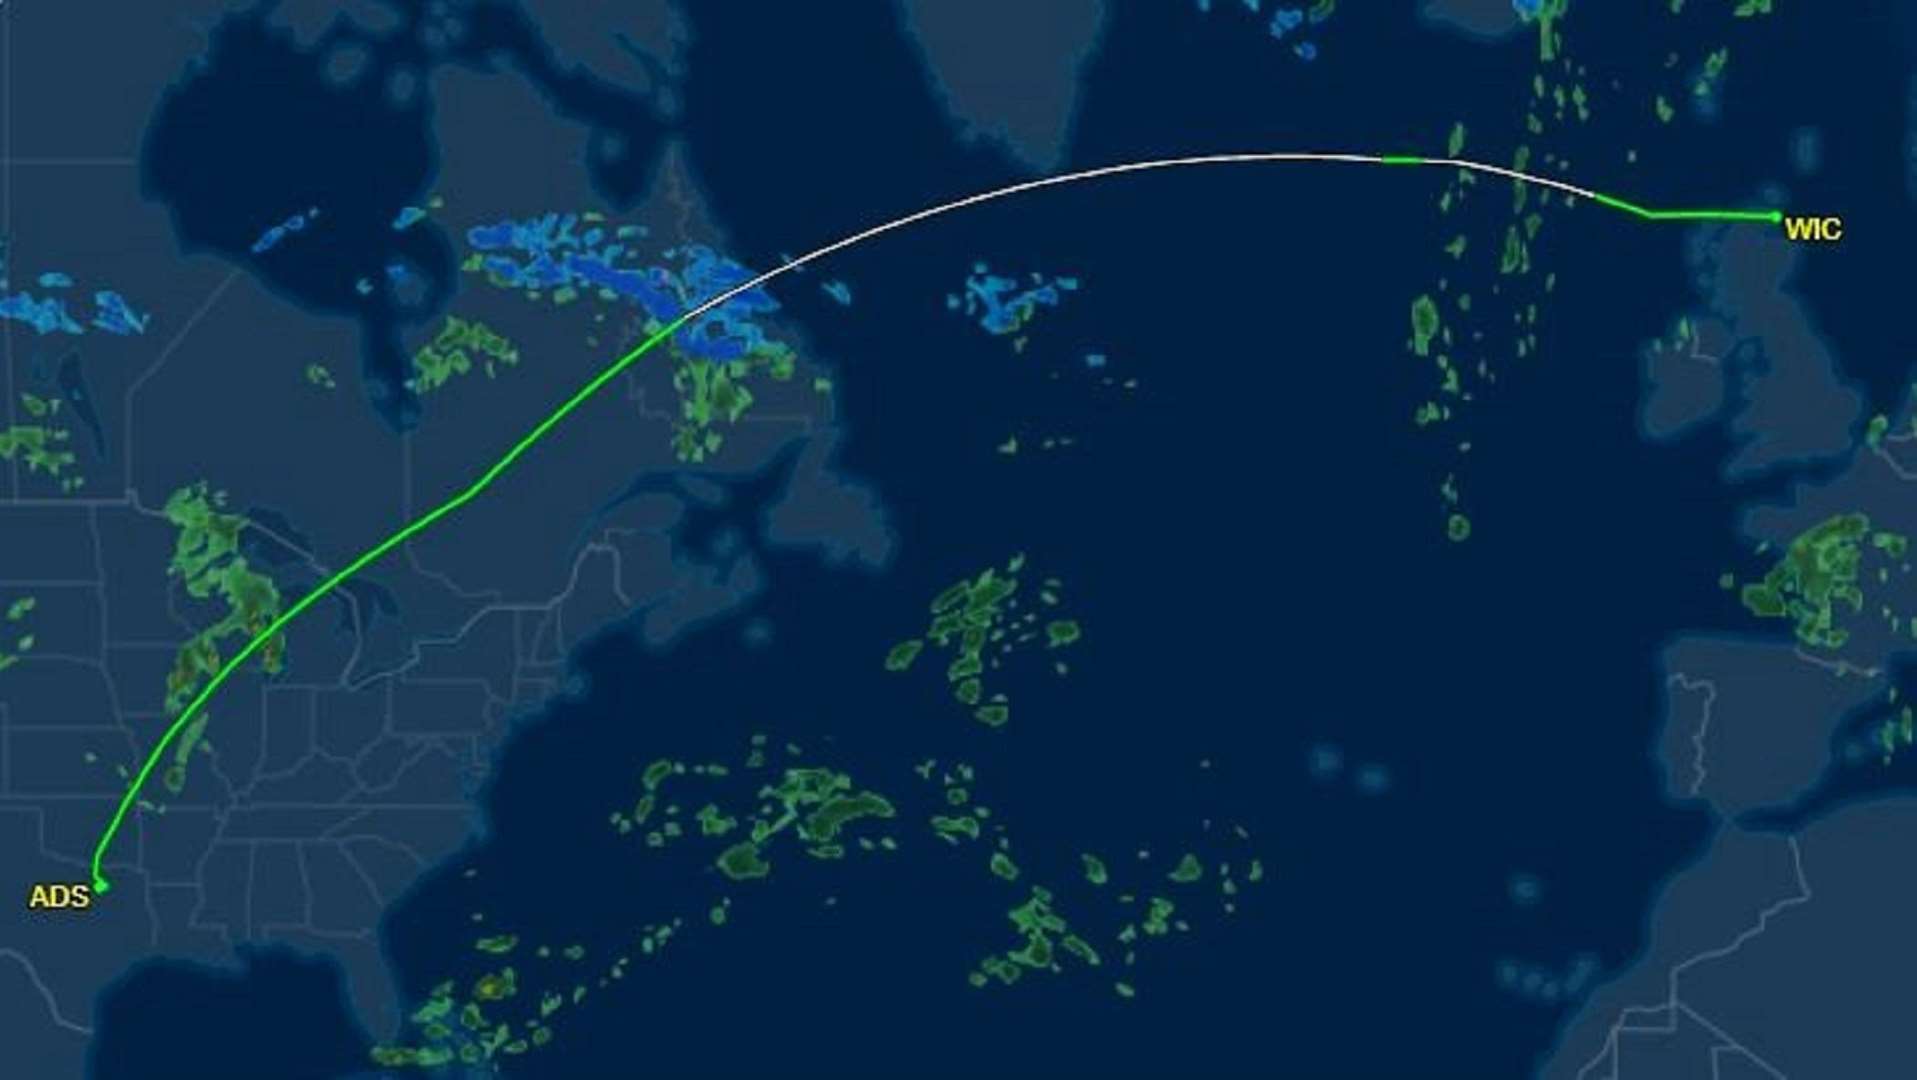 Flight path of the jet from Dallas to Wick.